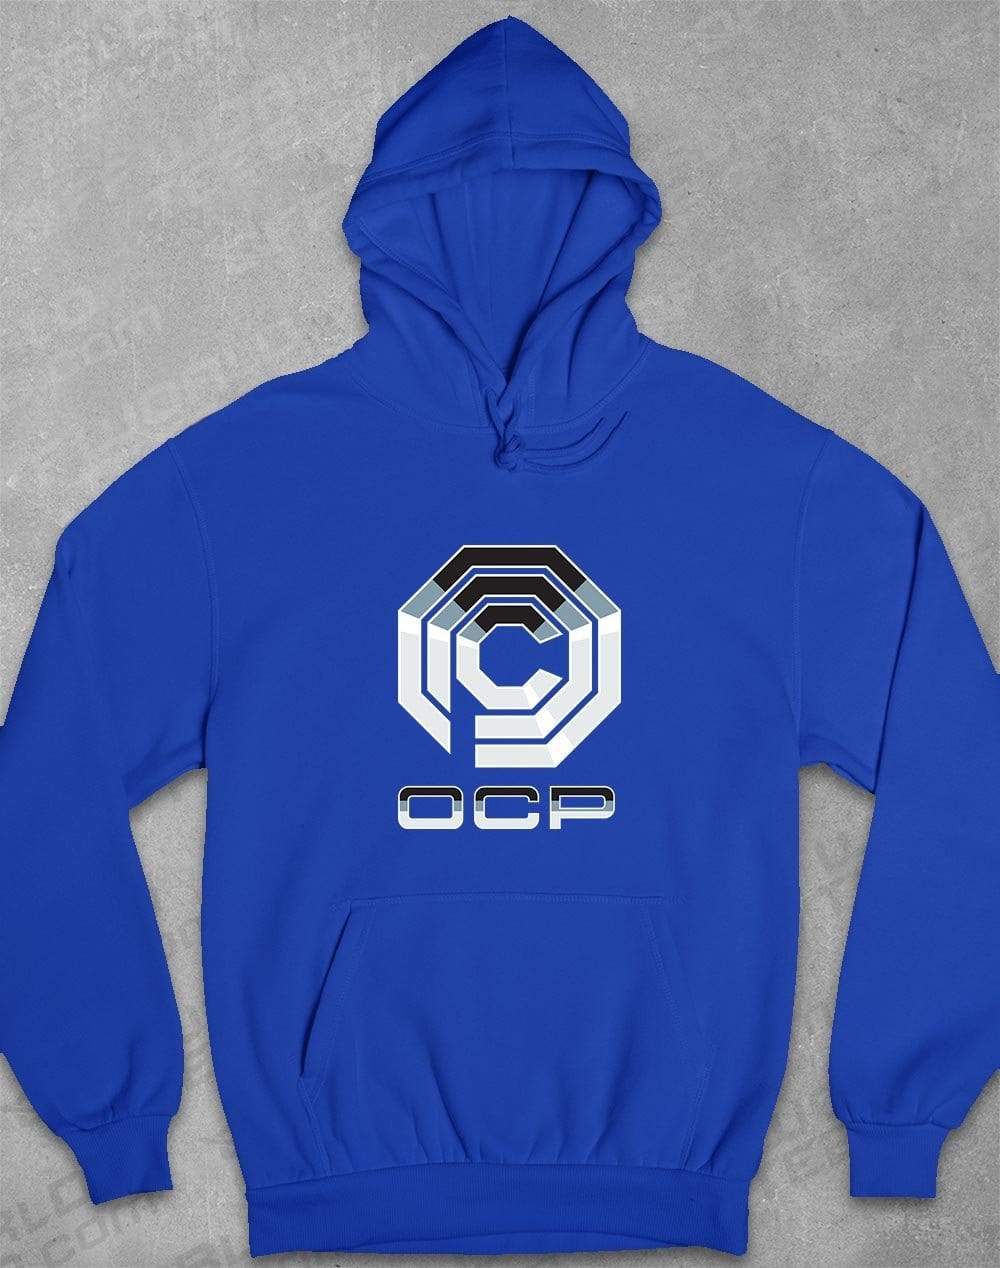 Omni Consumer Products Hoodie XS / Royal Blue  - Off World Tees